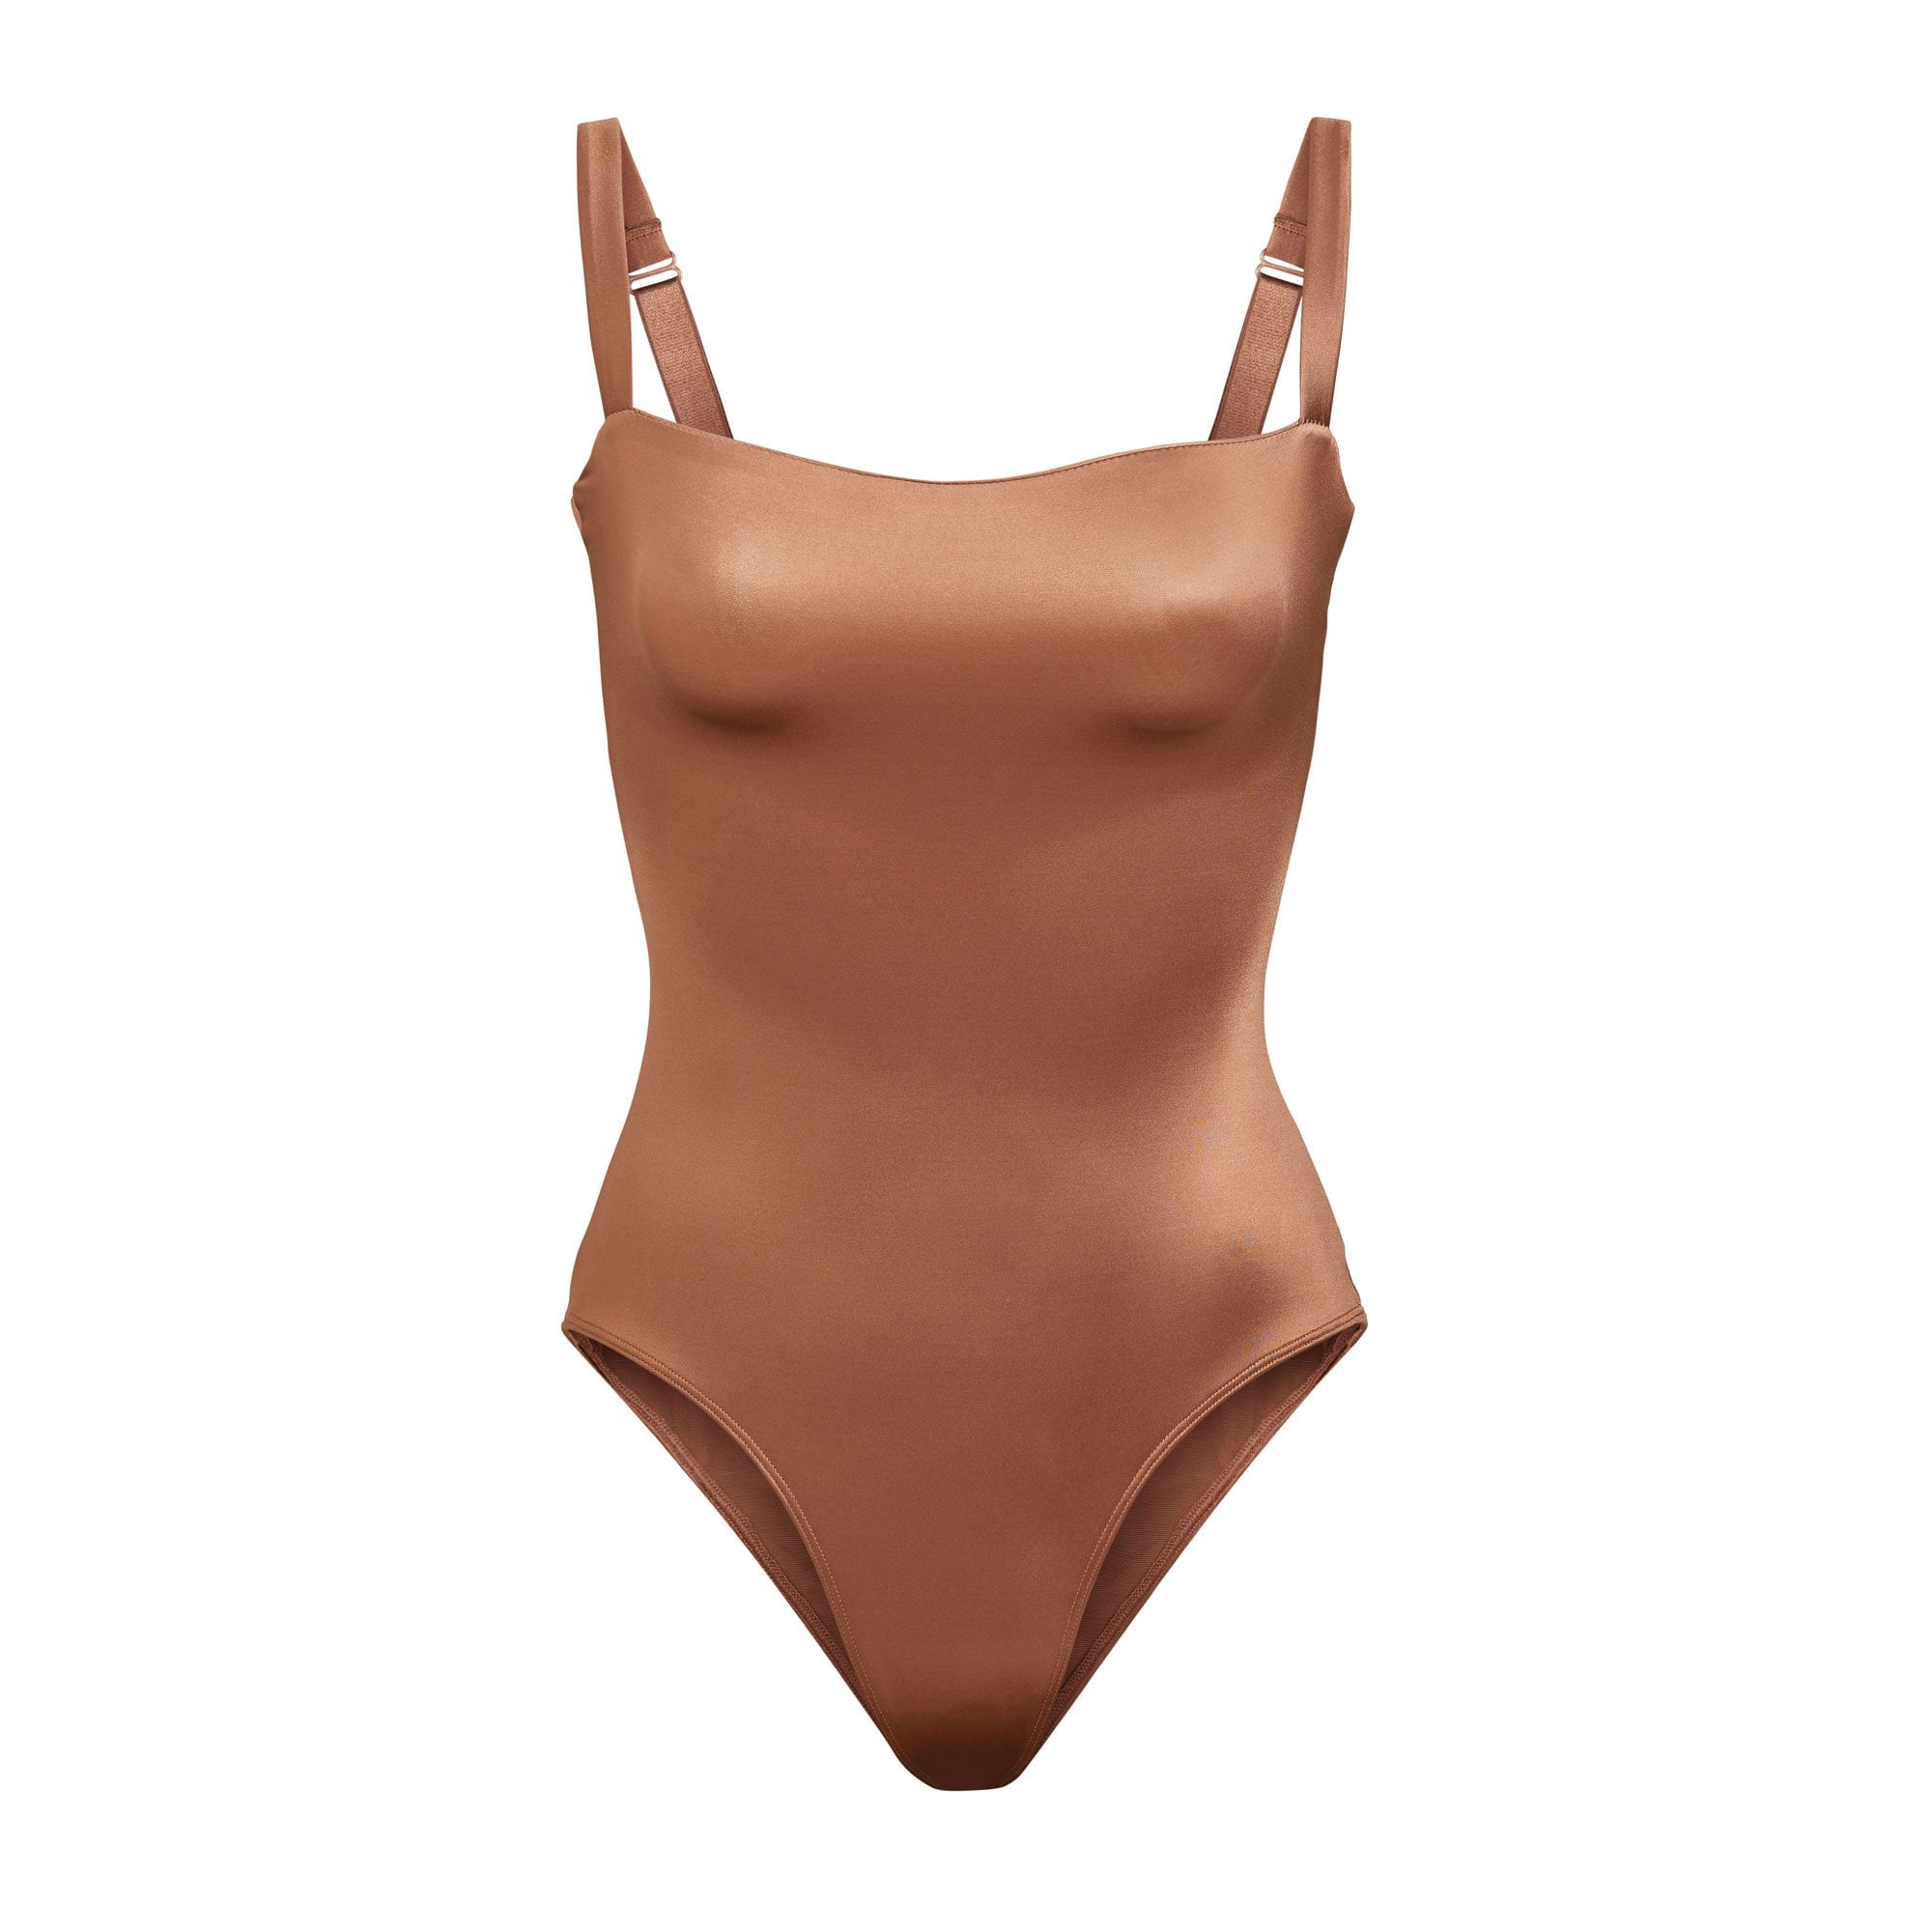 SKIMS Stretch Satin Smoothing Bodysuit in Jasper, SKIMS Is Launching a  Sexy Stretch Satin Lingerie Line Just in Time For Valentine's Day